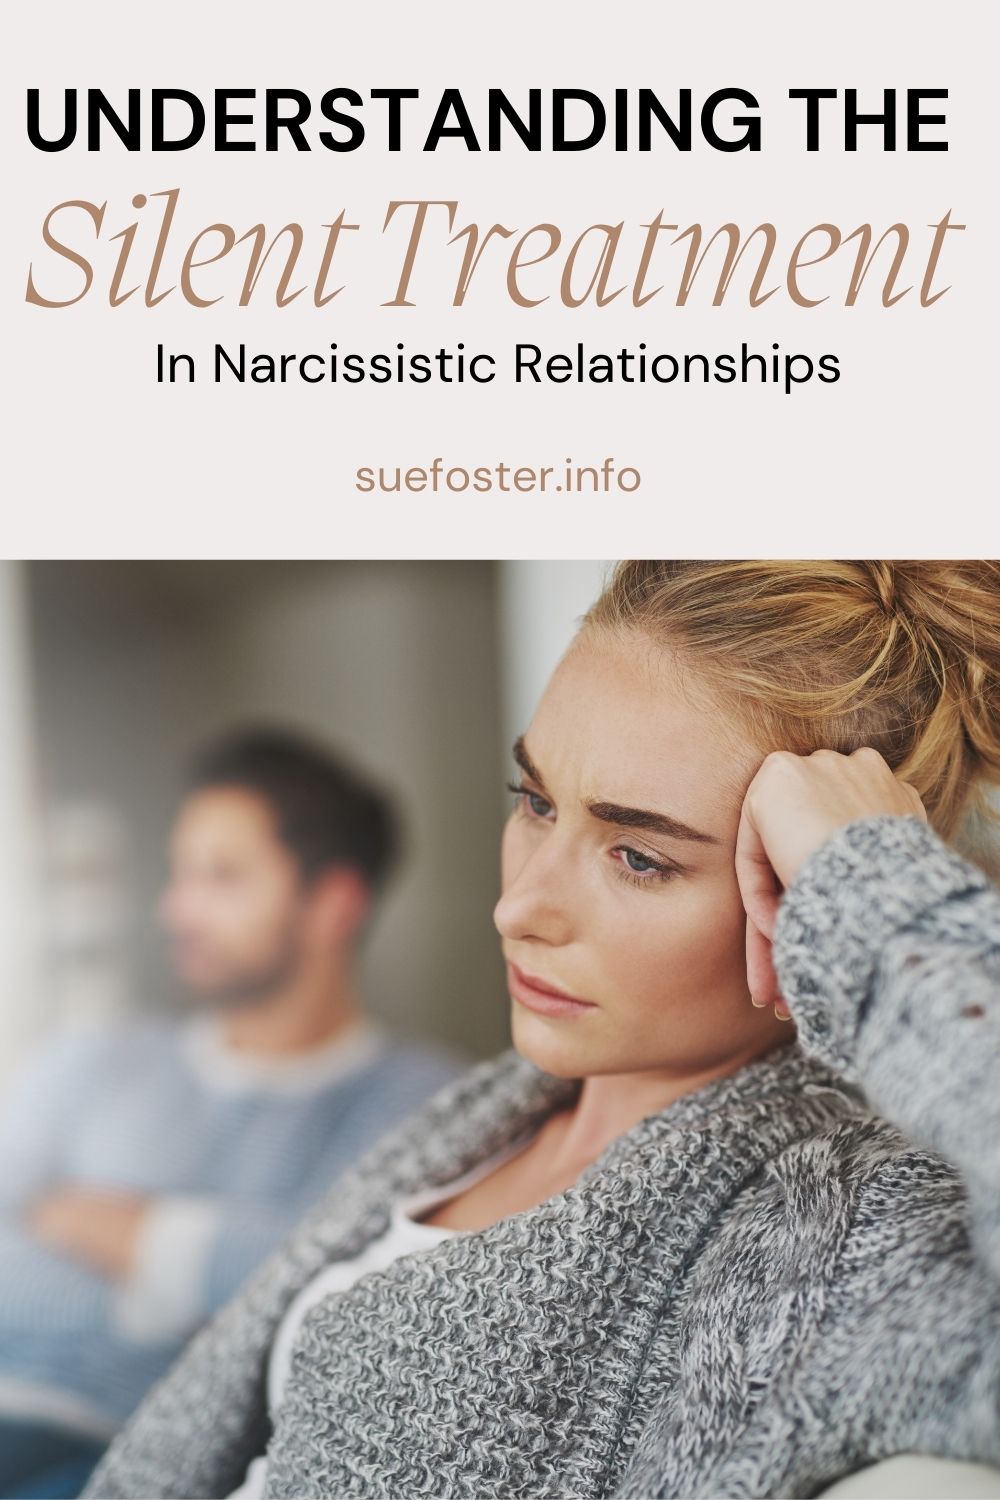 The Silent Treatment and its Impact. Learn about the manipulative tactic used by narcissists, its aftermath, and strategies to break free and prioritize self-care. 